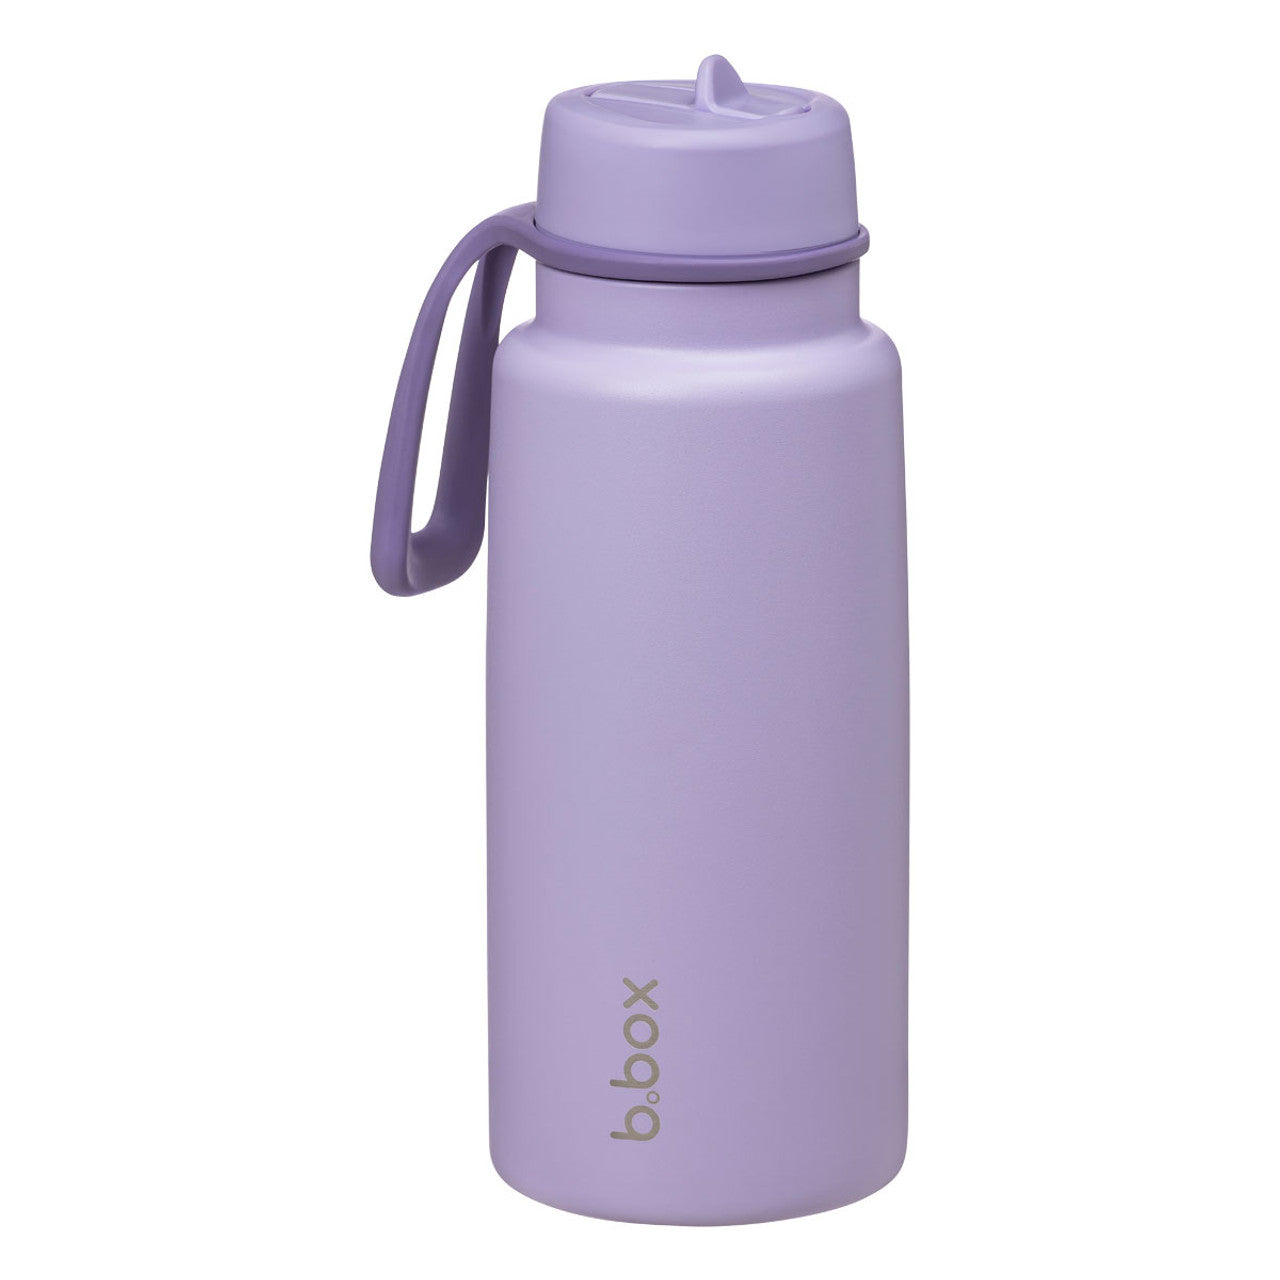 b.box insulated 1 litre drink bottle